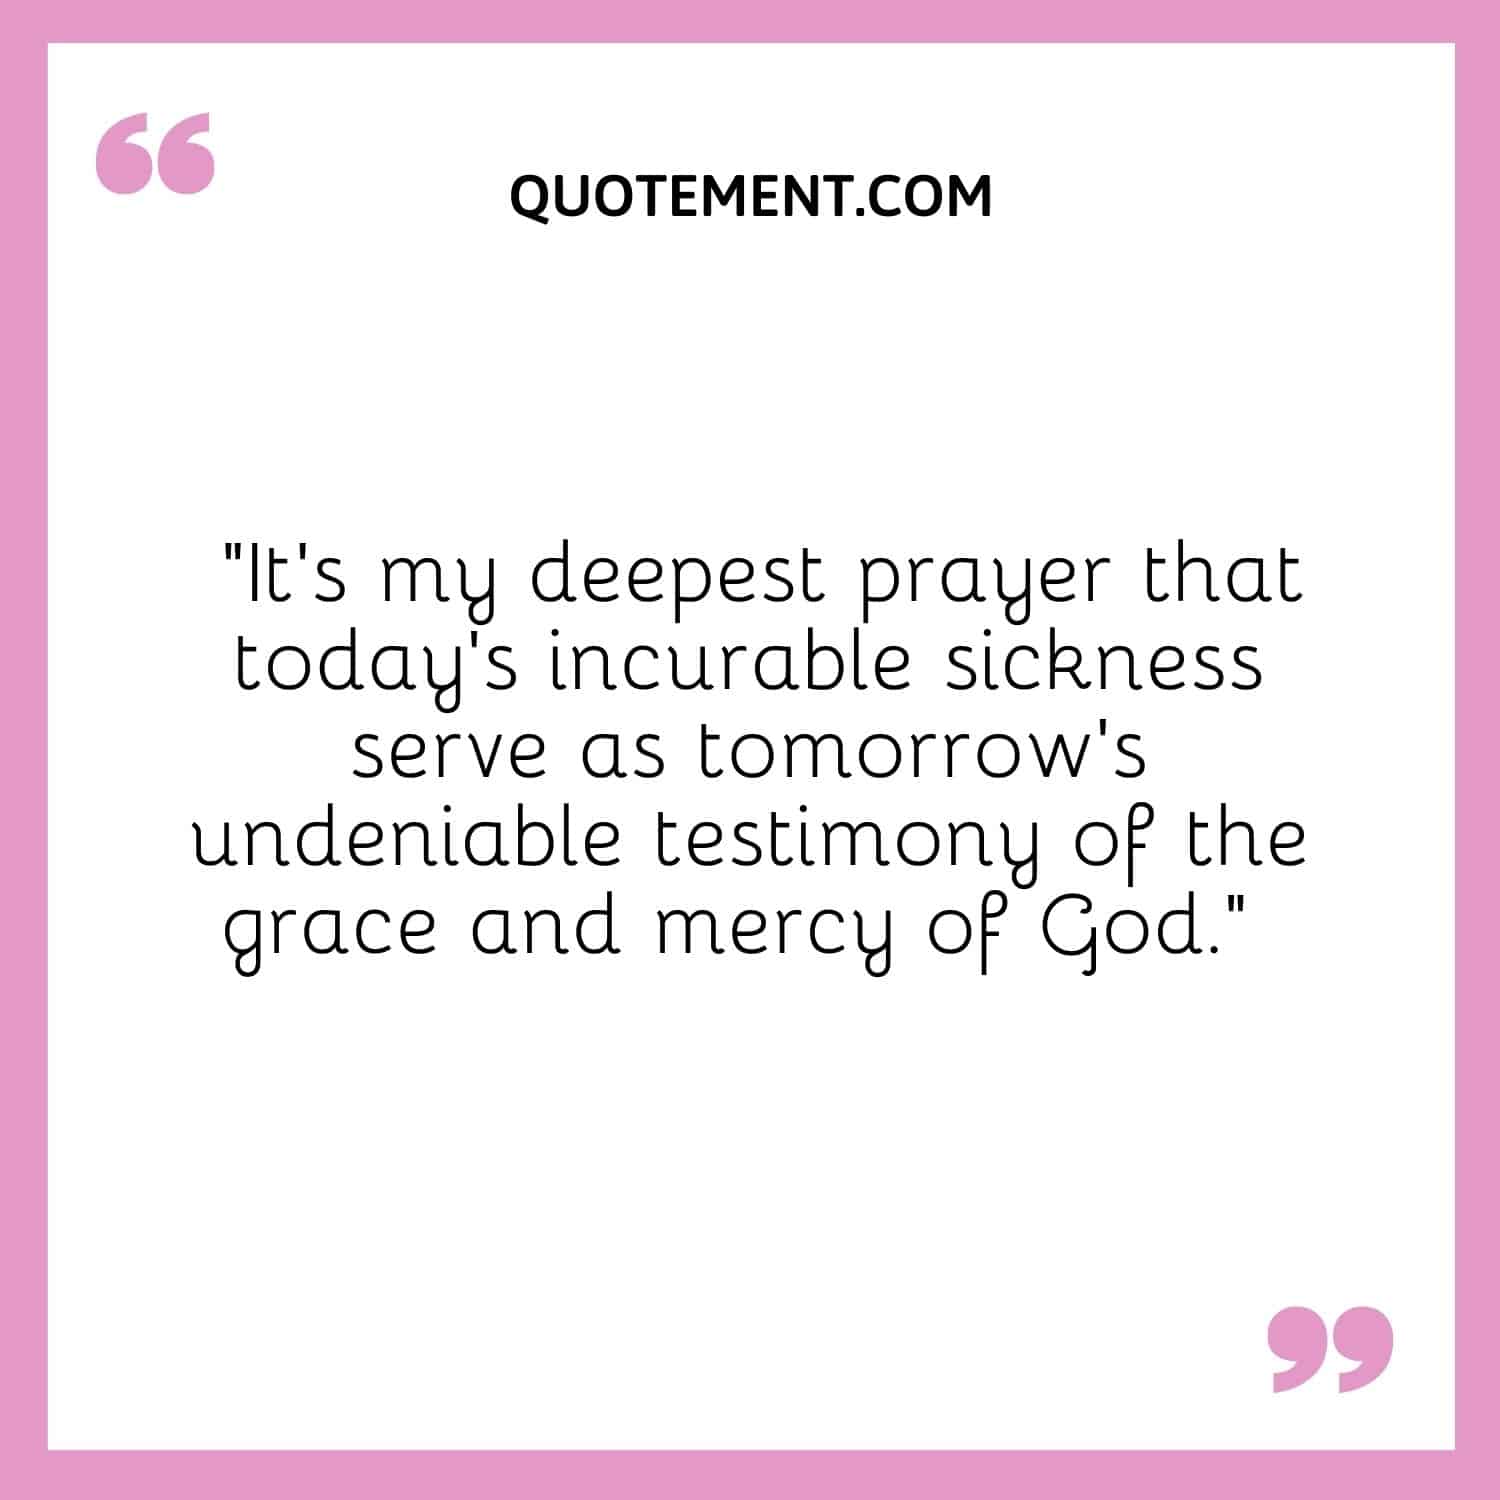 It's my deepest prayer that today's incurable sickness serve as tomorrow's undeniable testimony of the grace and mercy of God.